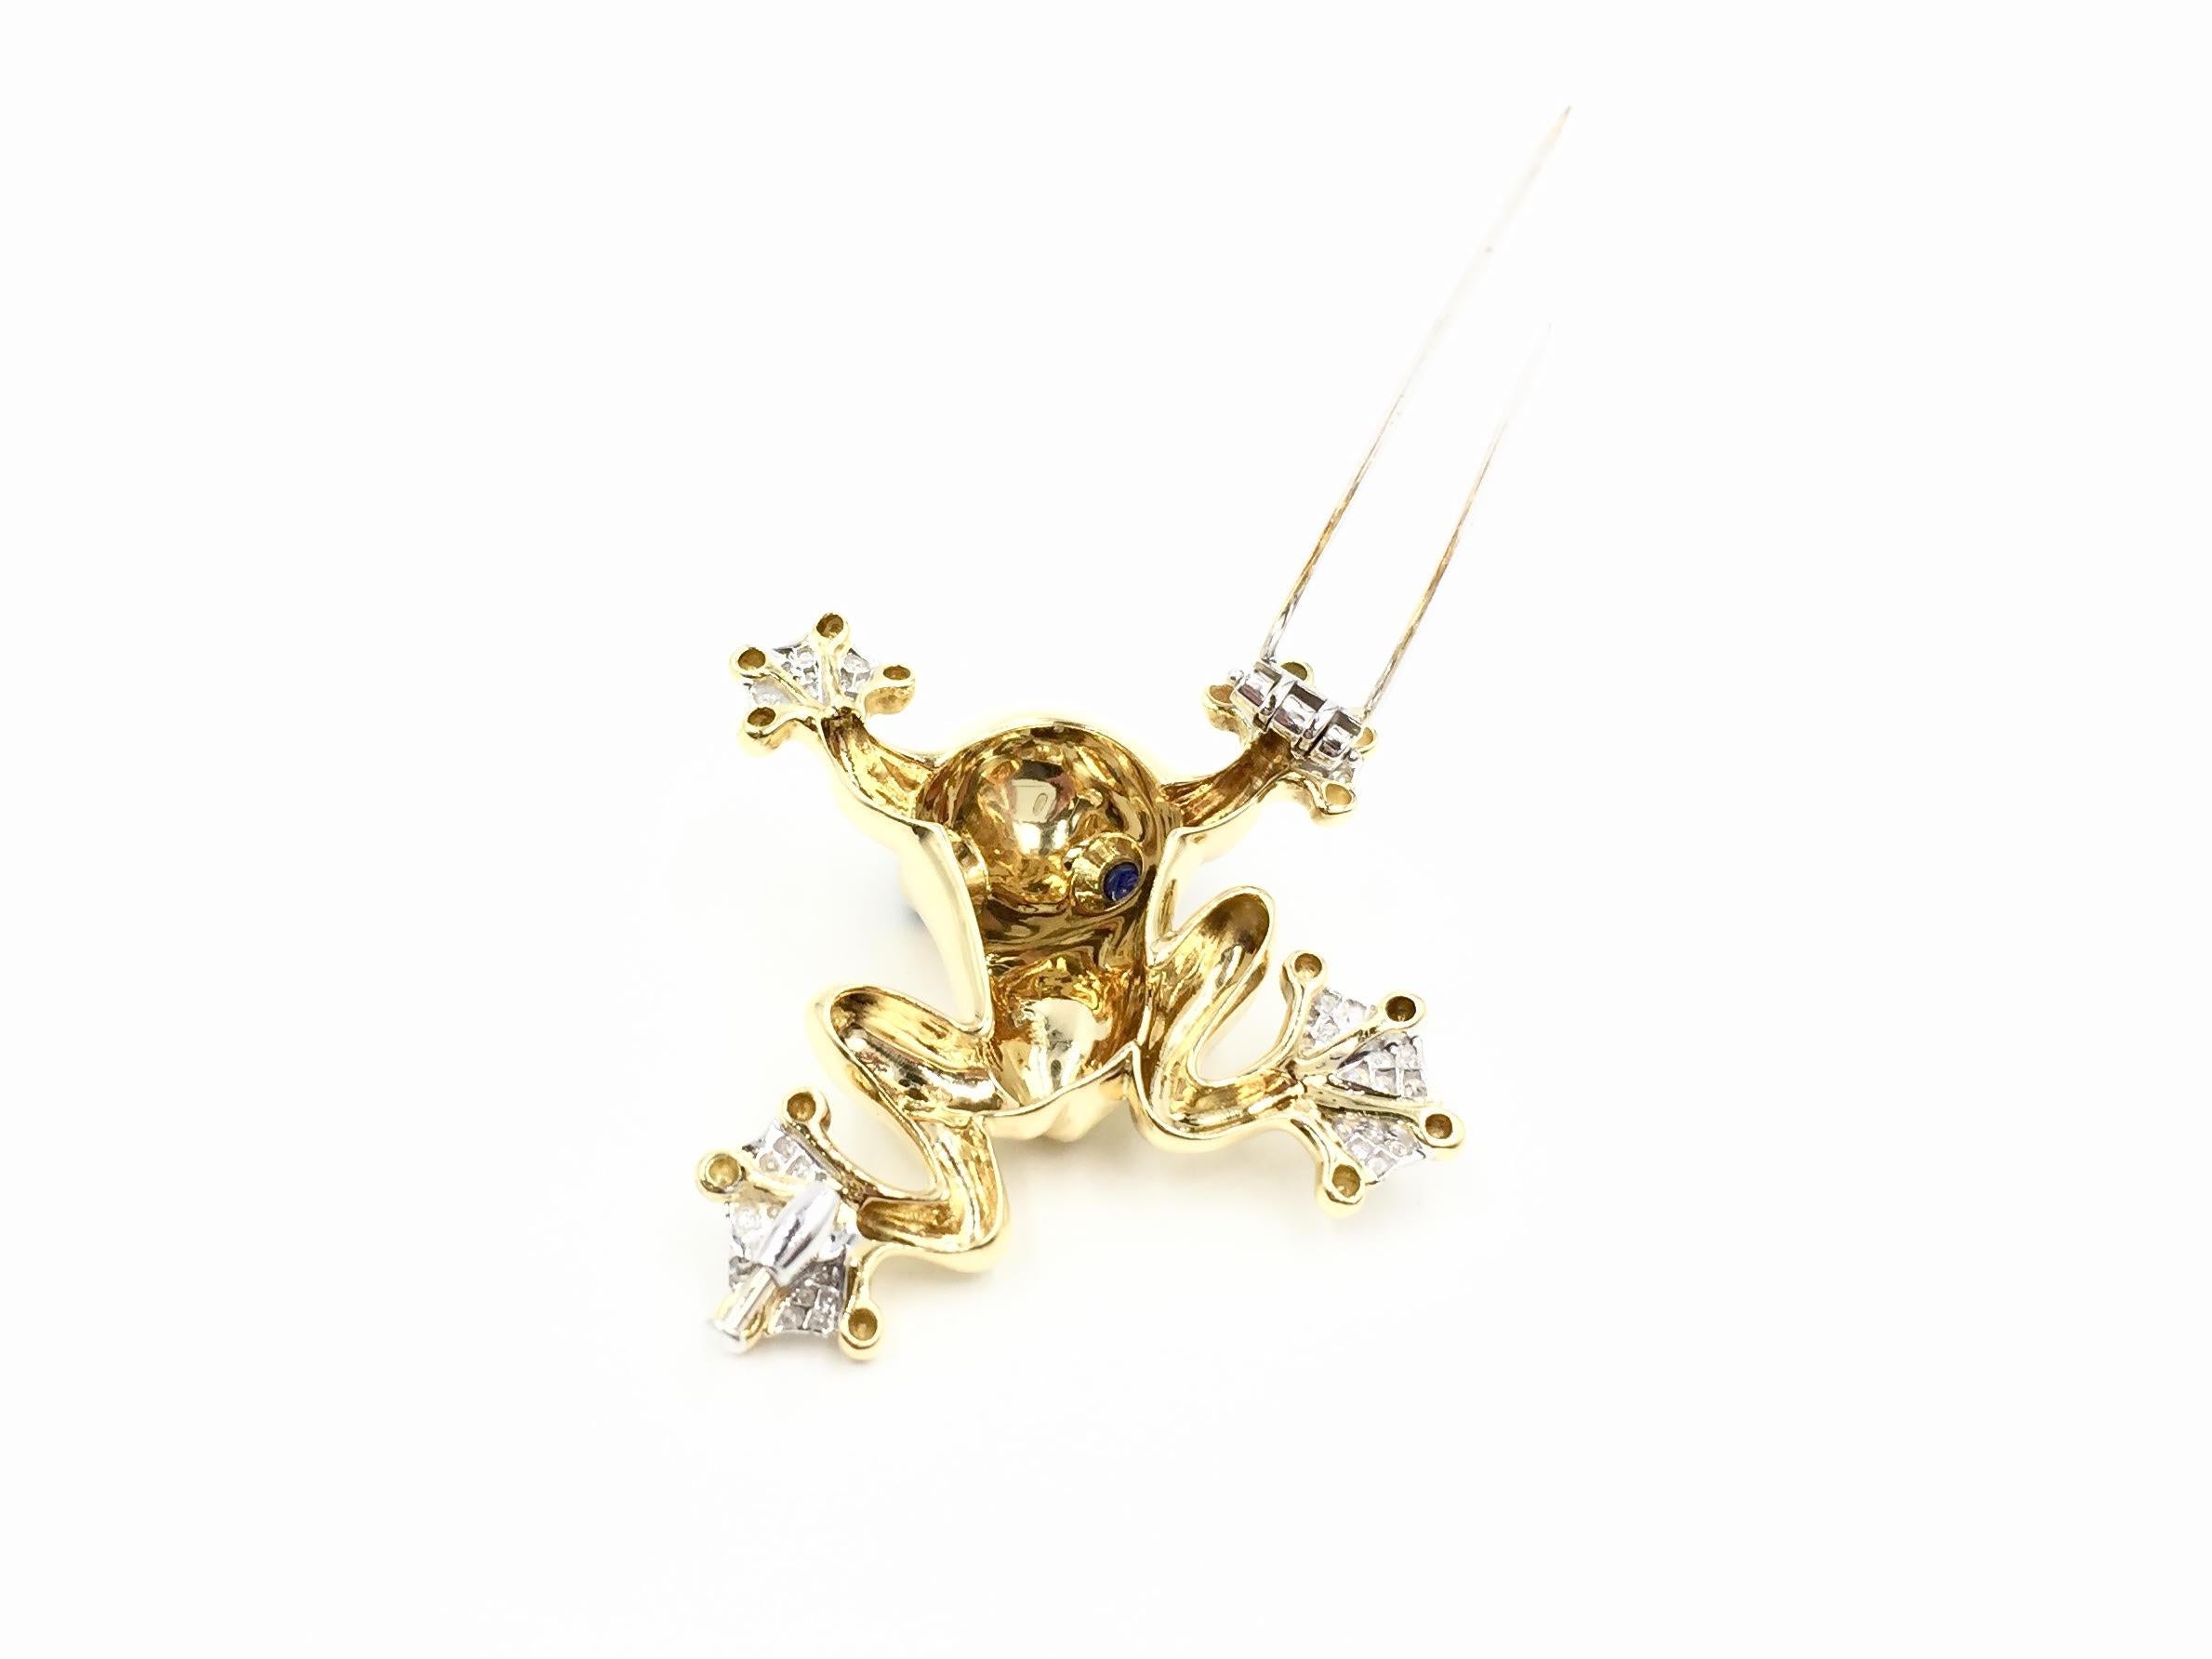 18 Karat Gold Frog Brooch with Diamonds and Blue Sapphires 2